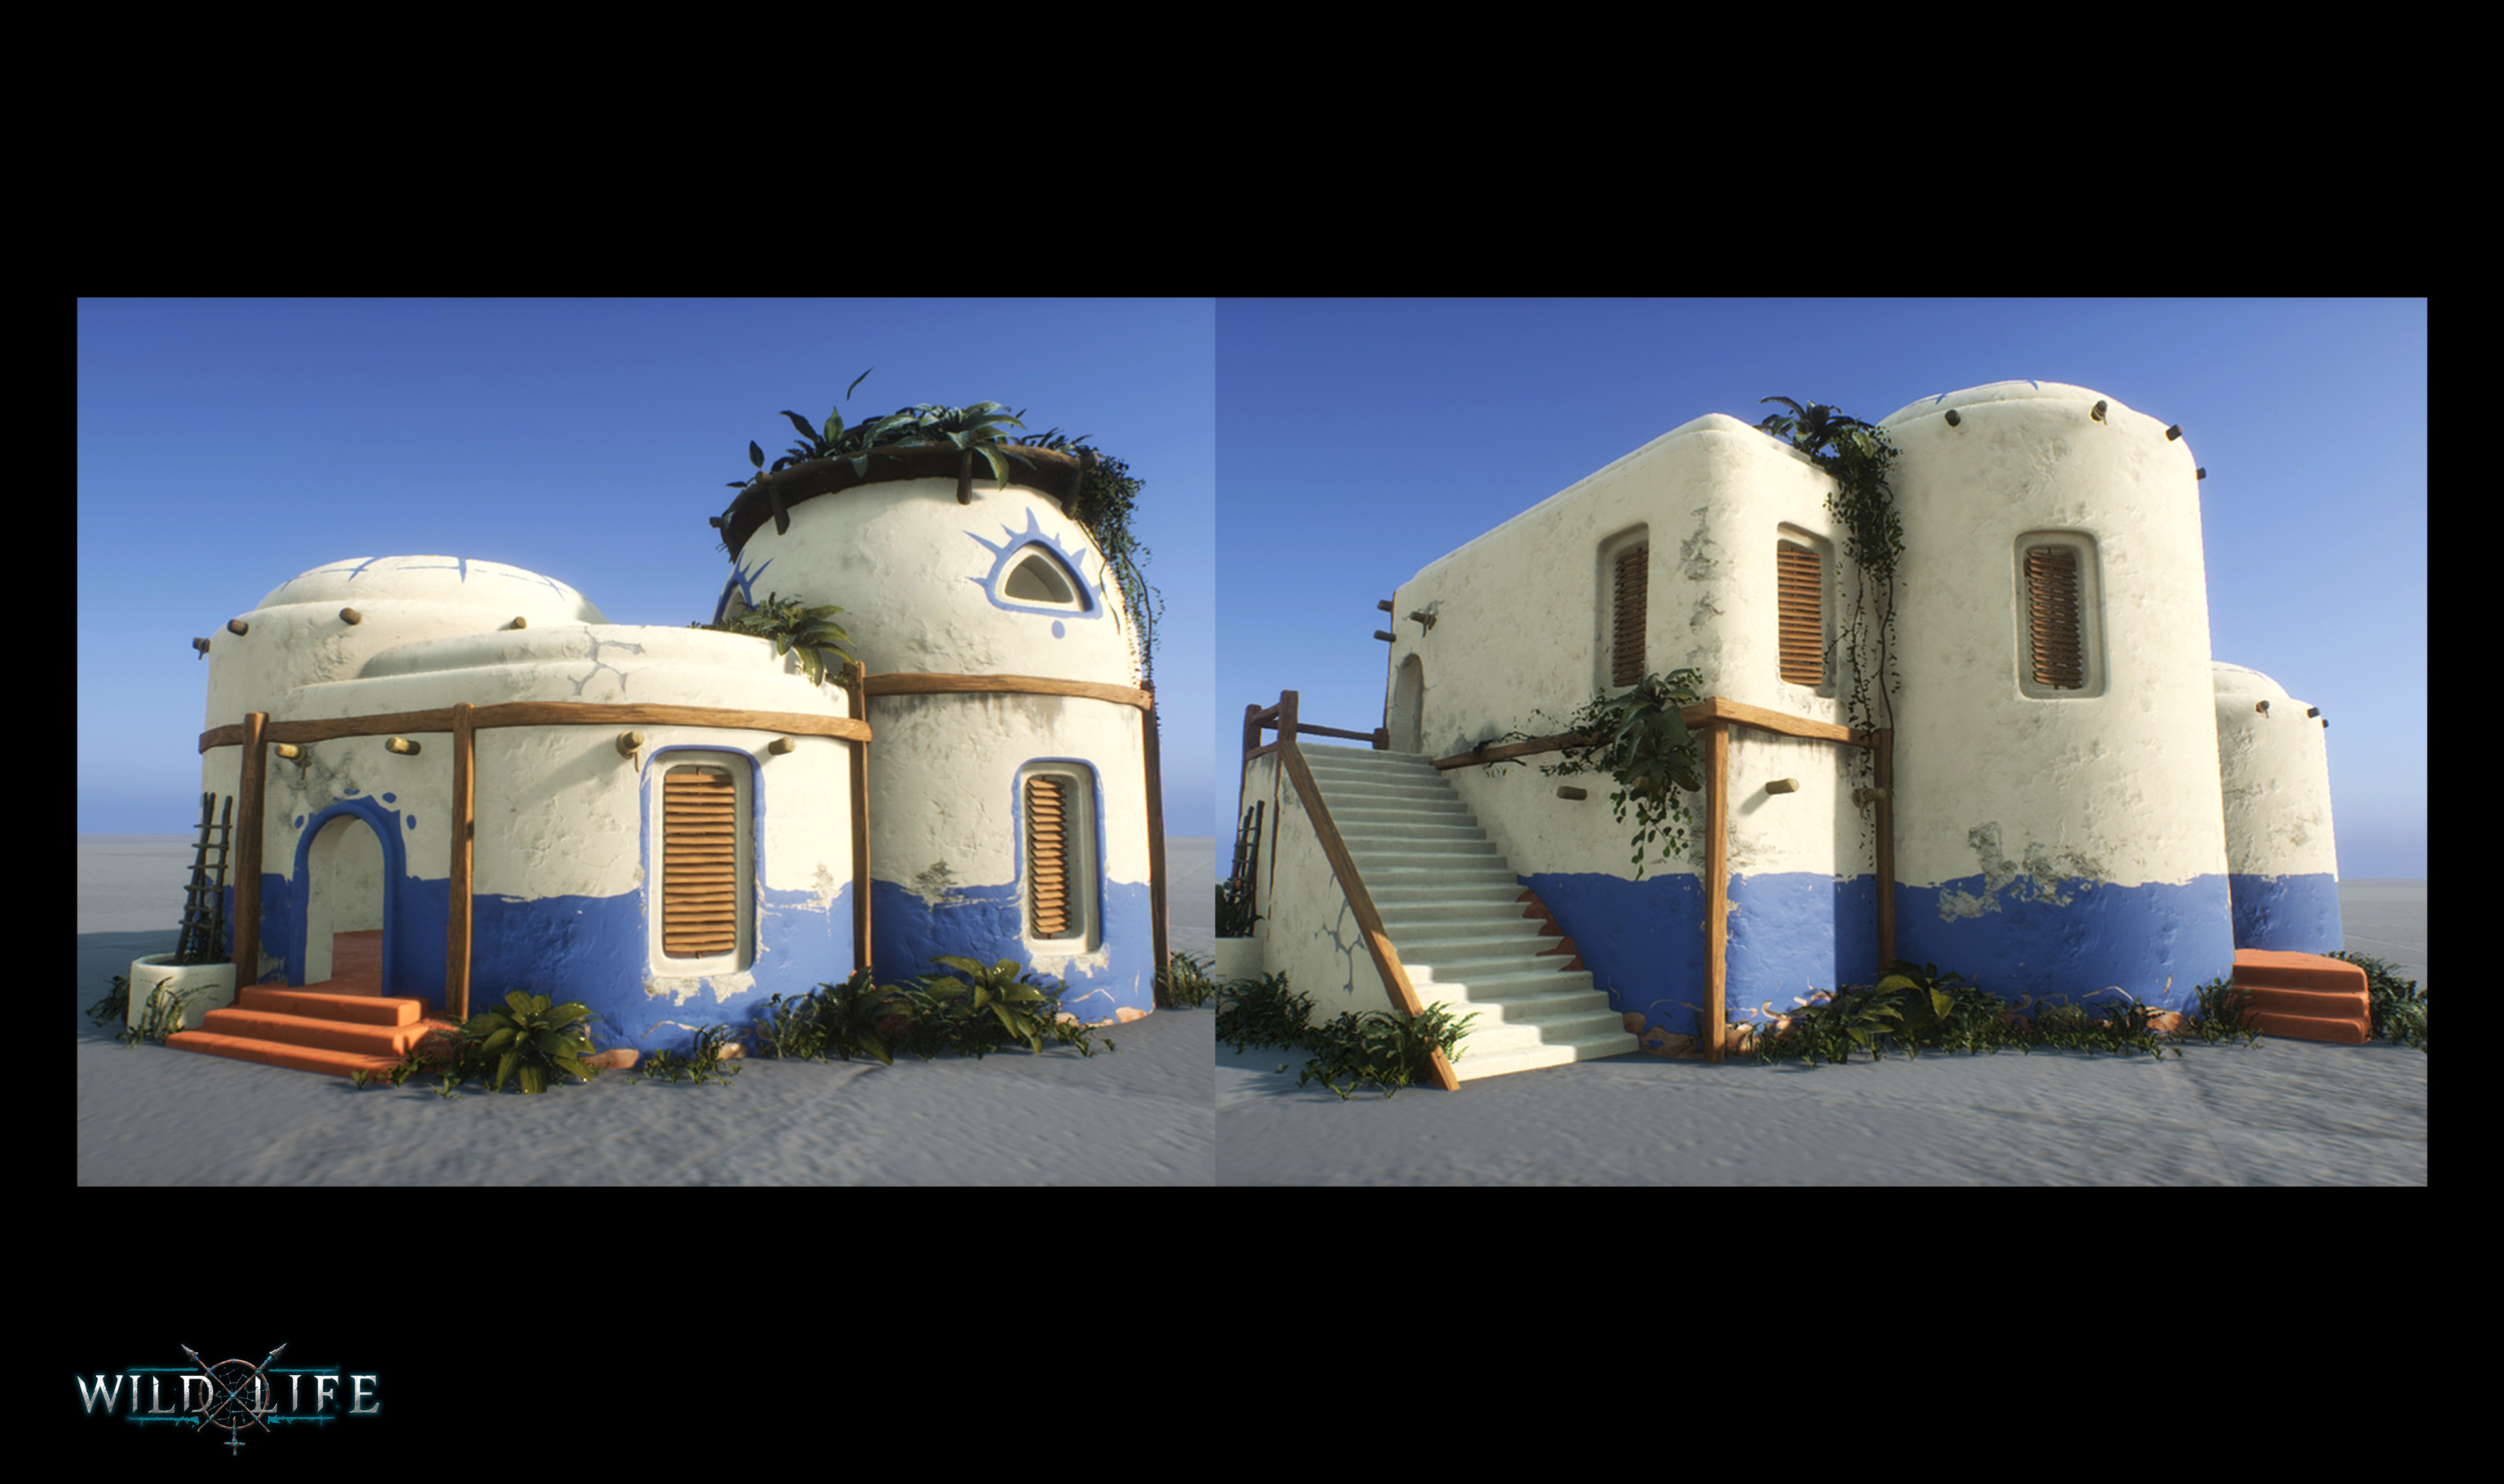 Unreal Asset created by 3D modeler Tobias